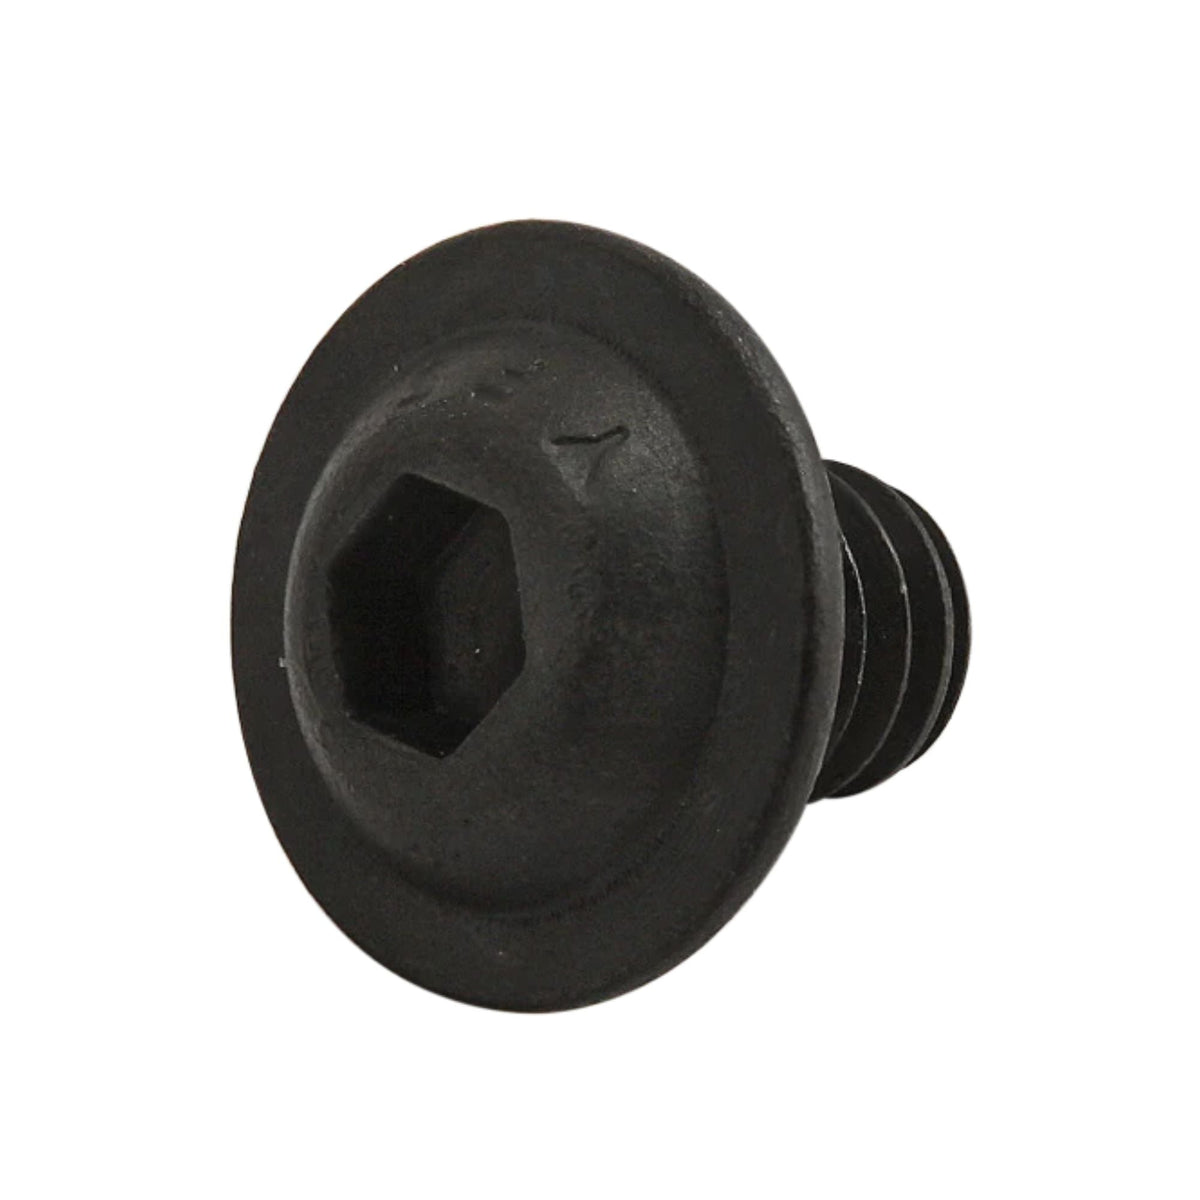 front side view of a black metal screw with a head head on the left and a very short threaded stem on the right